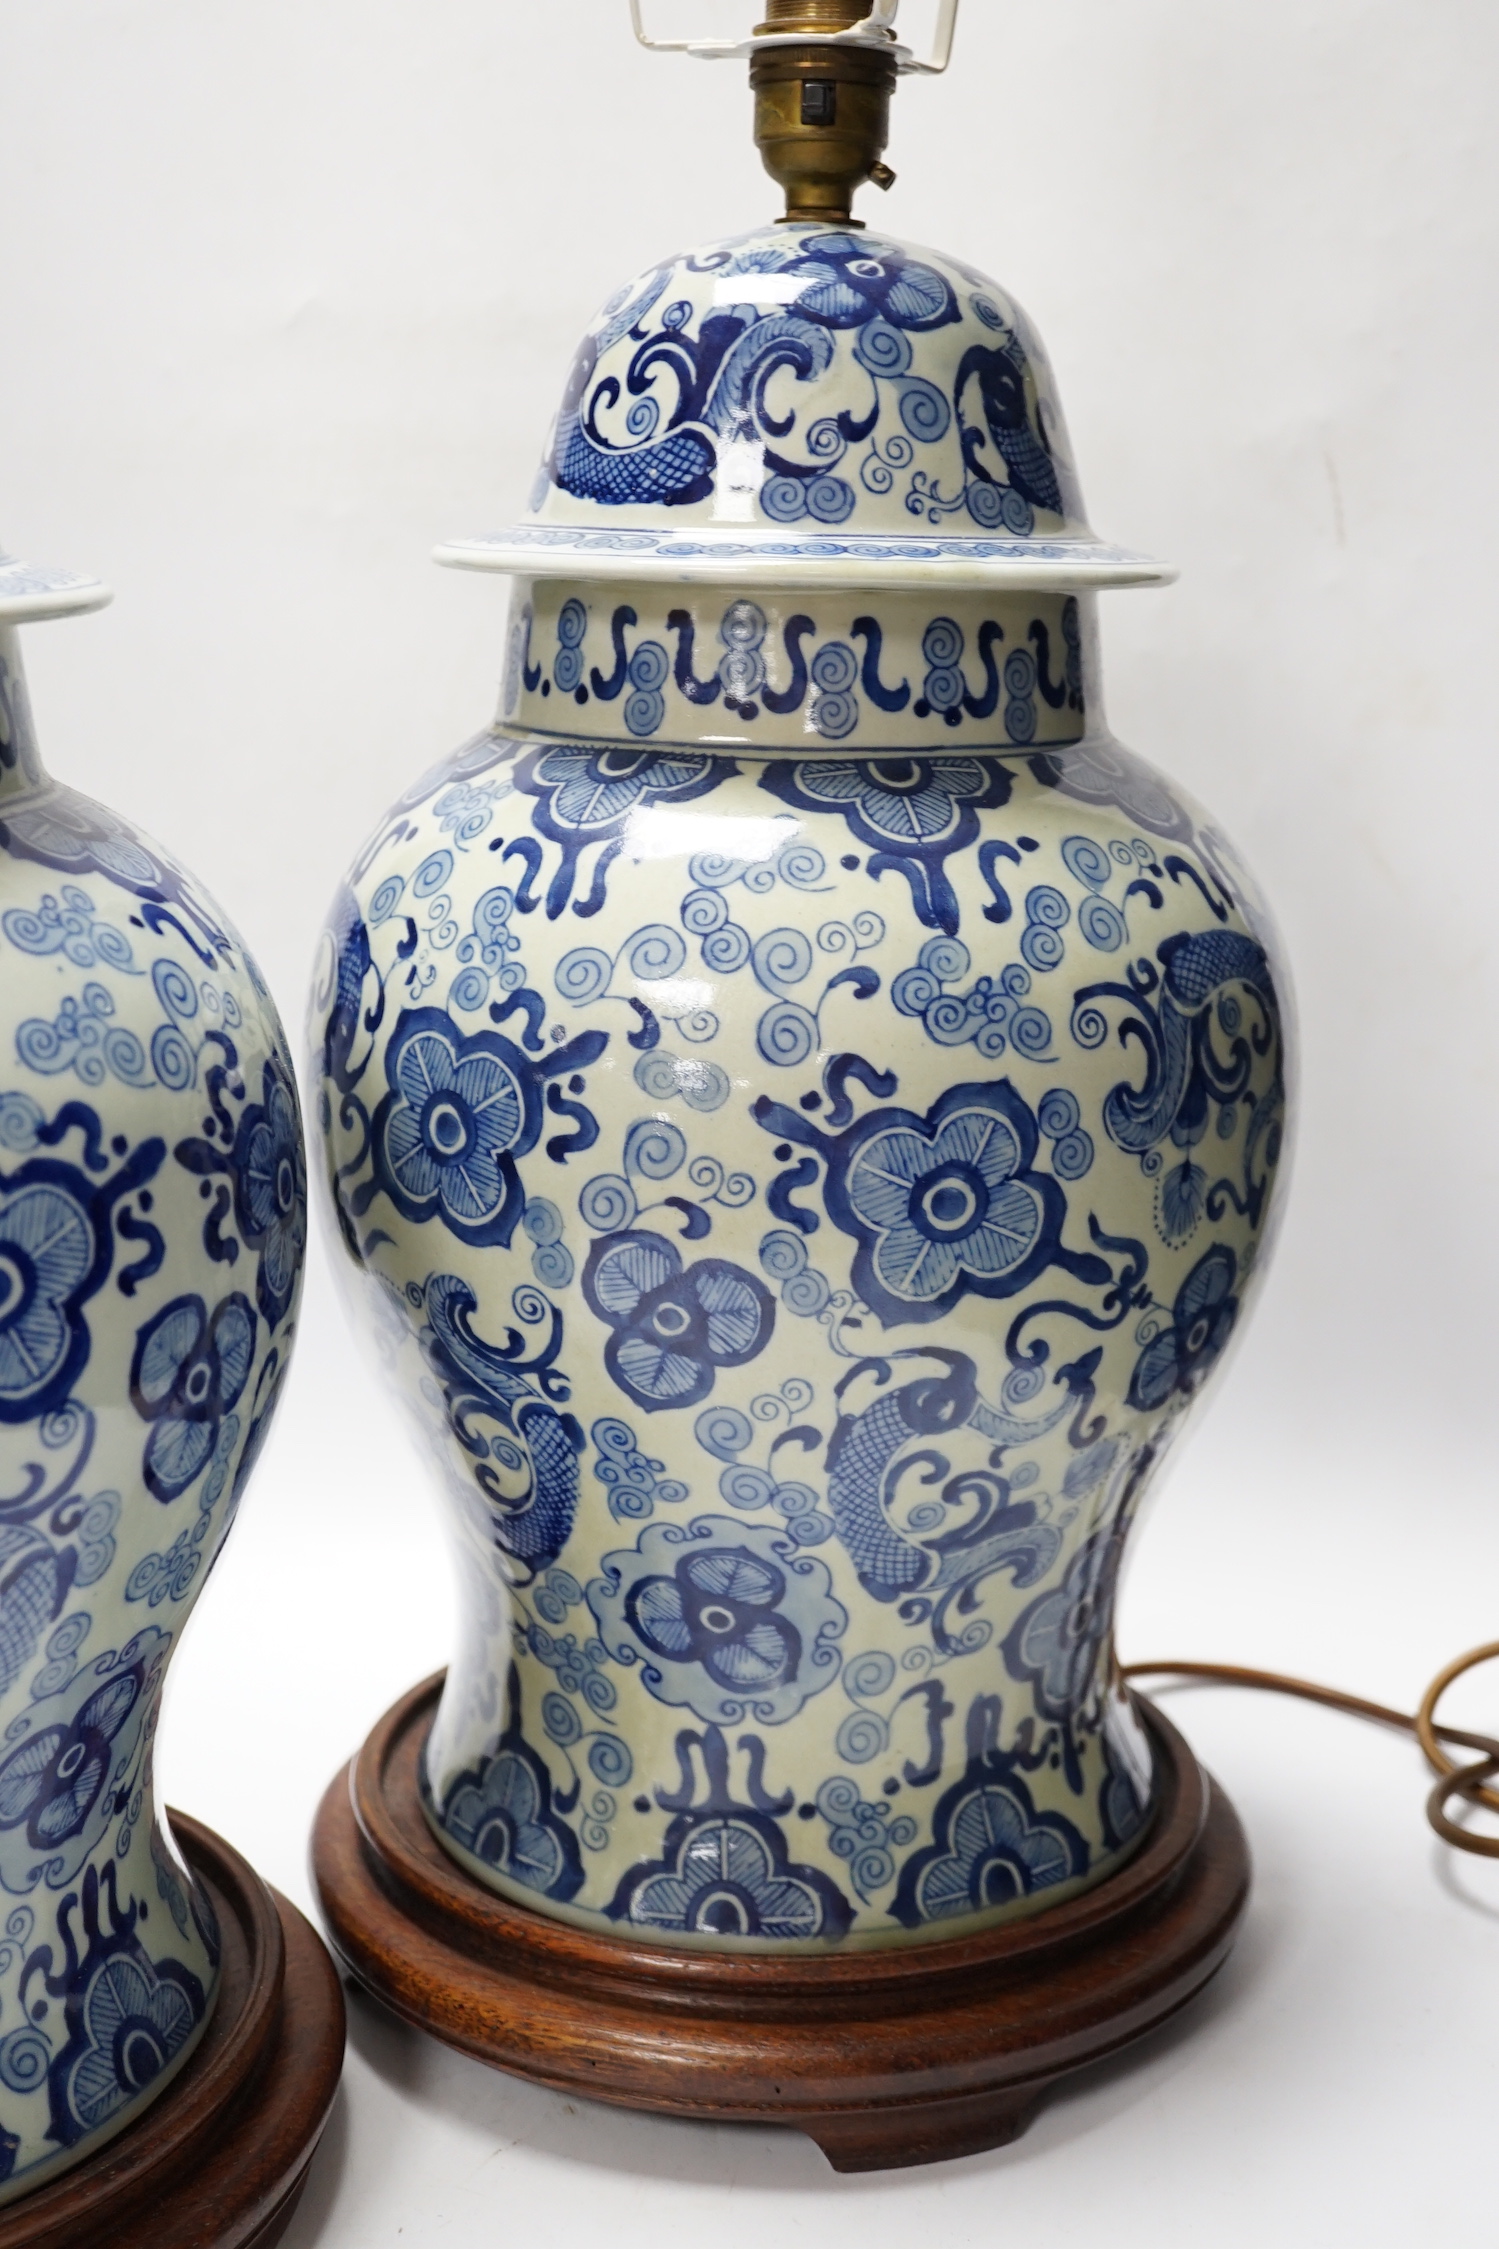 A pair of modern Chinese blue and white table lamps